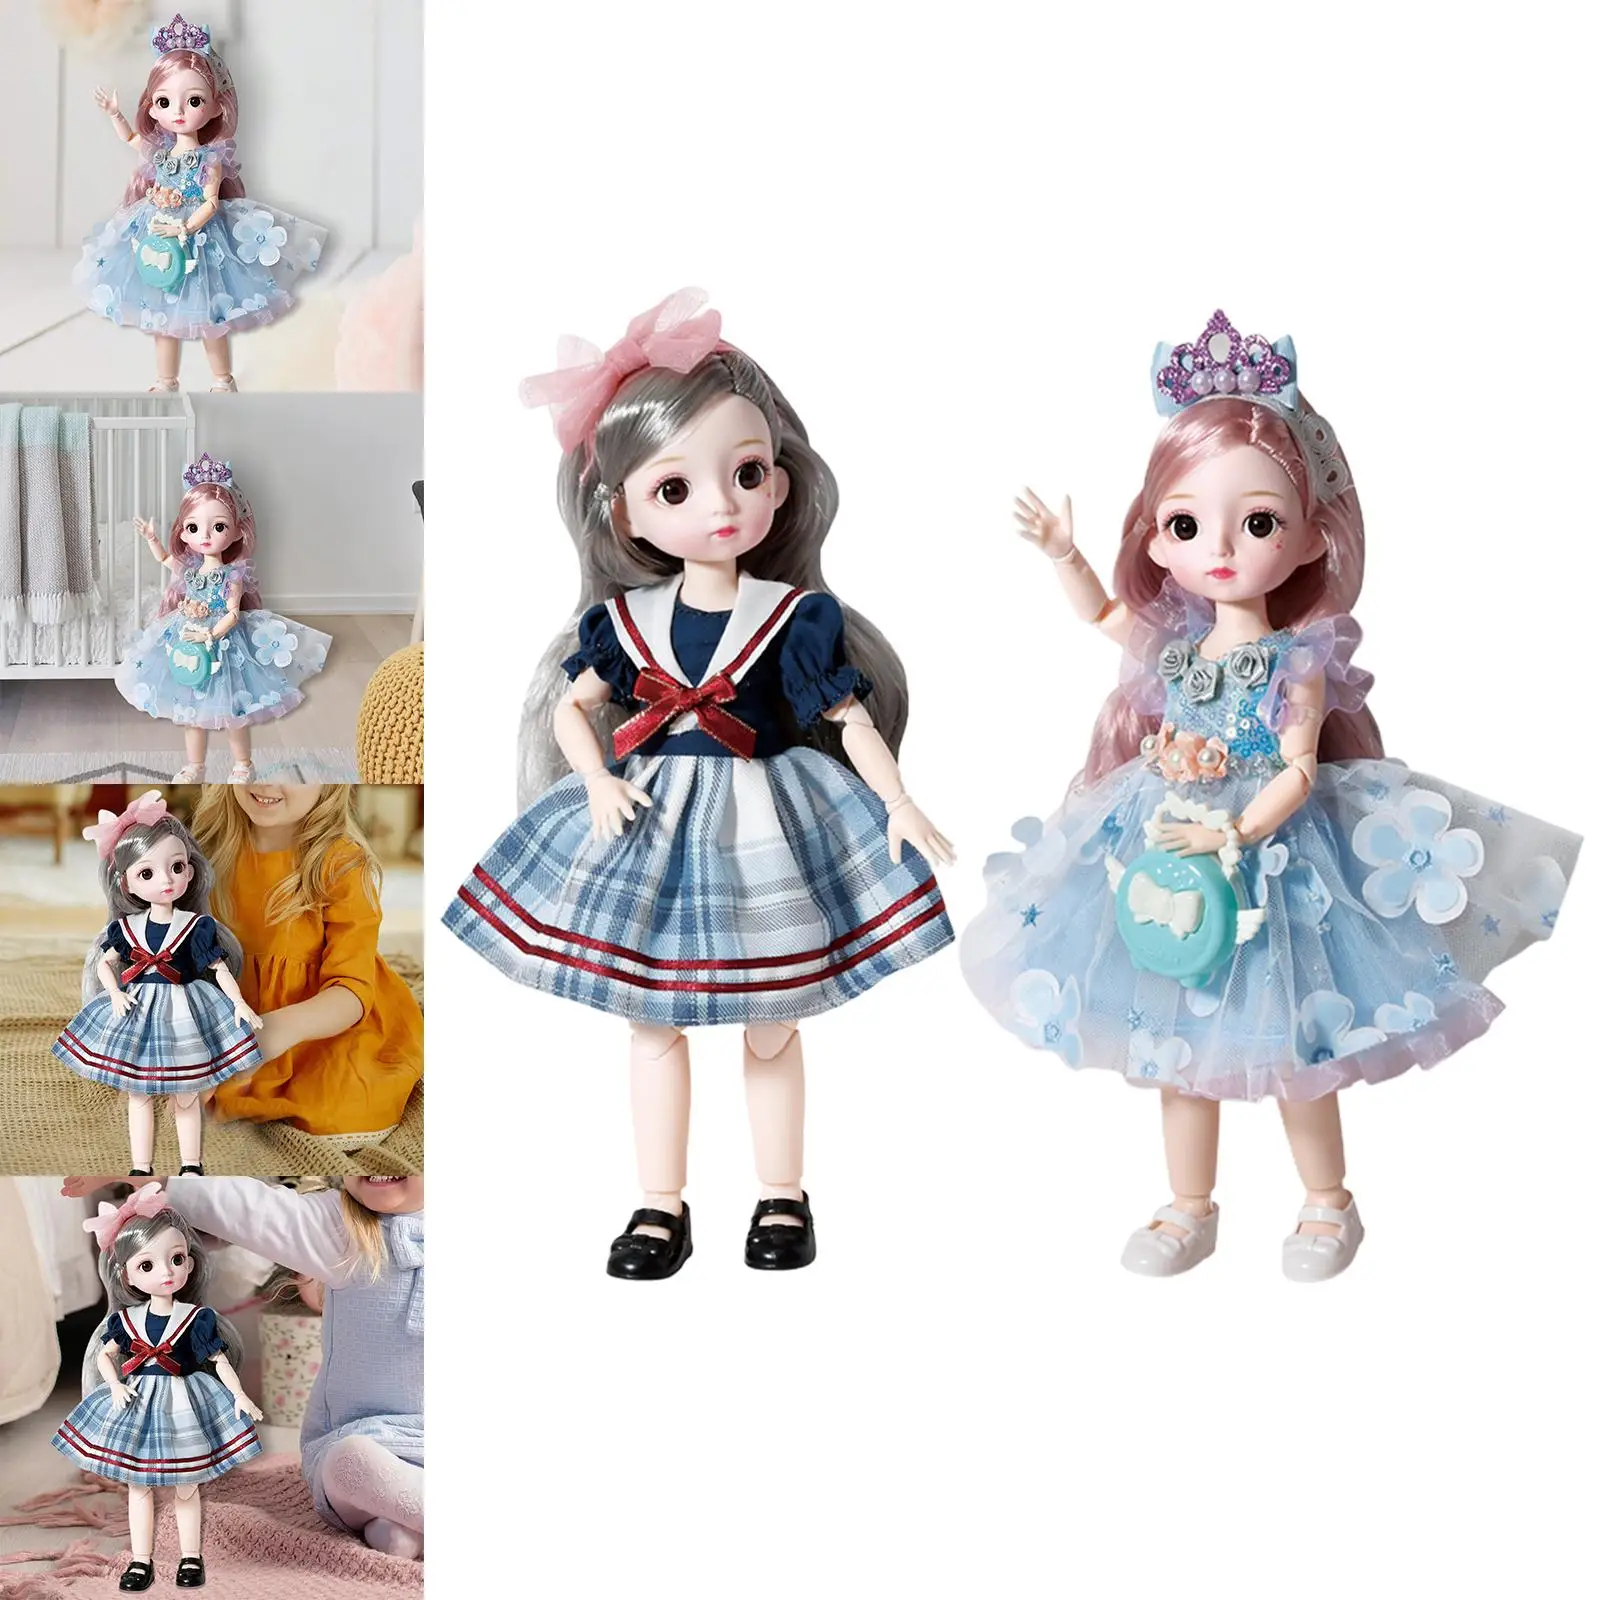 1/6 31cm Fashion Doll with Clothes and Shoes Flexible Joints for Gifts Toy